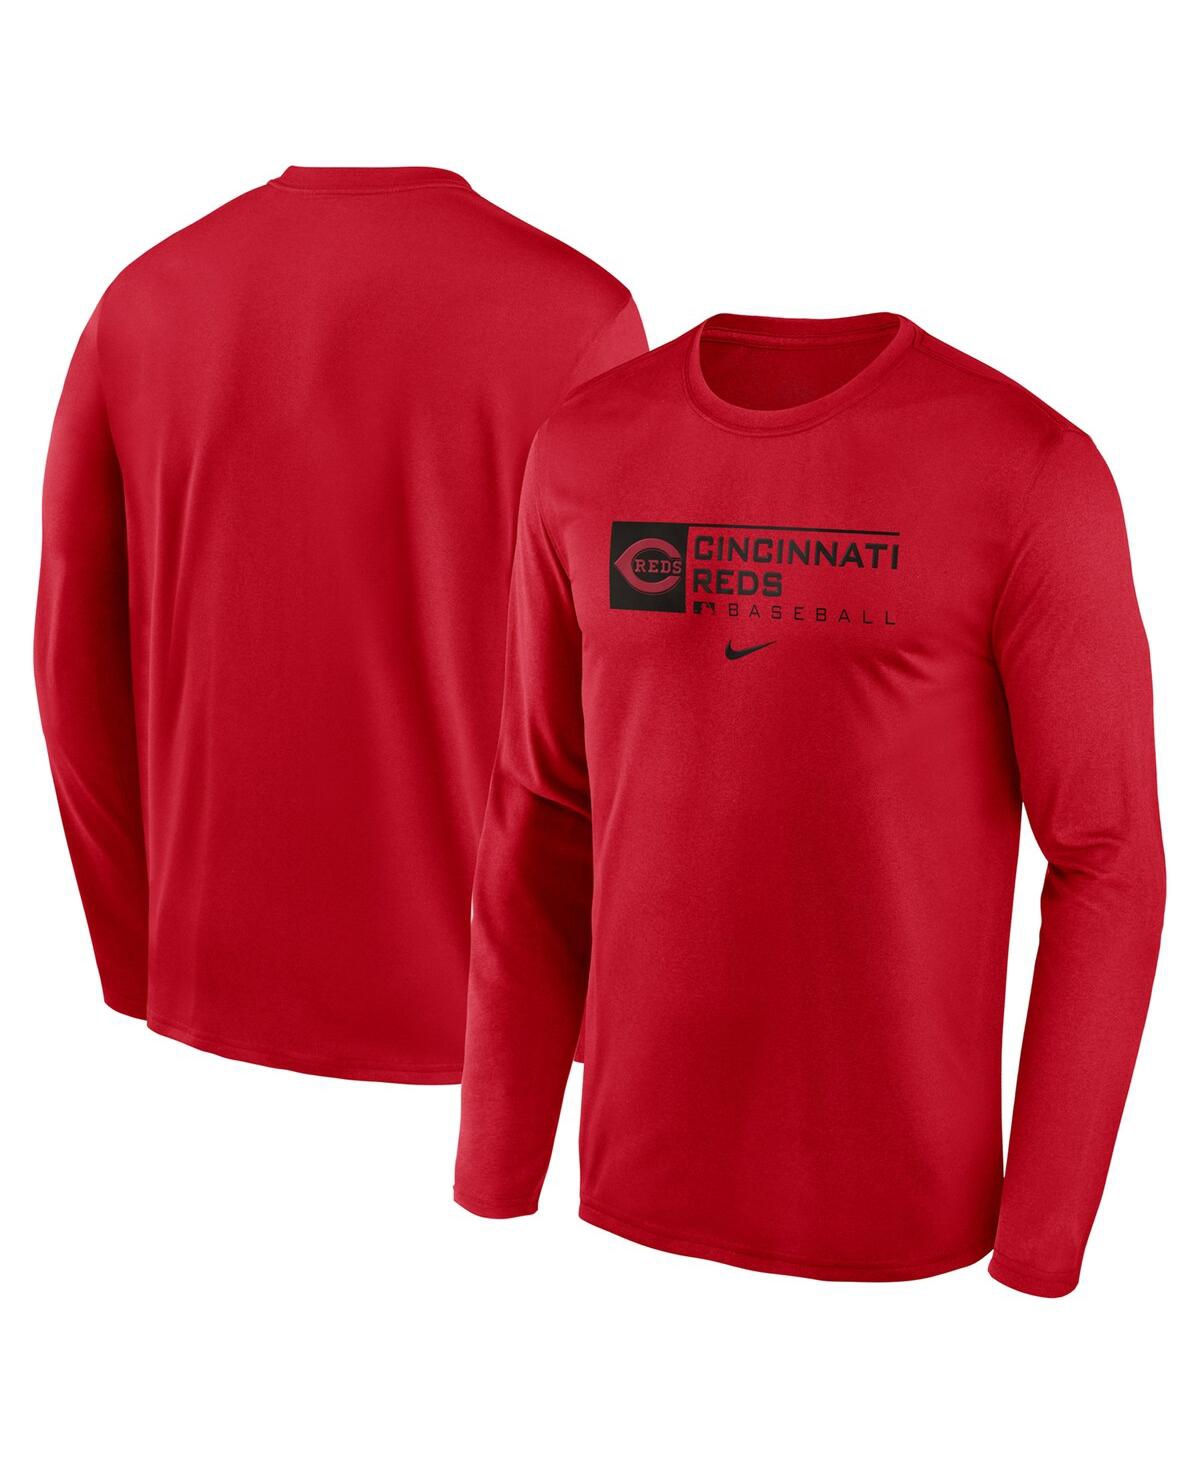 NIKE MEN'S NIKE RED CINCINNATI REDS AUTHENTIC COLLECTION PERFORMANCE LONG SLEEVE T-SHIRT